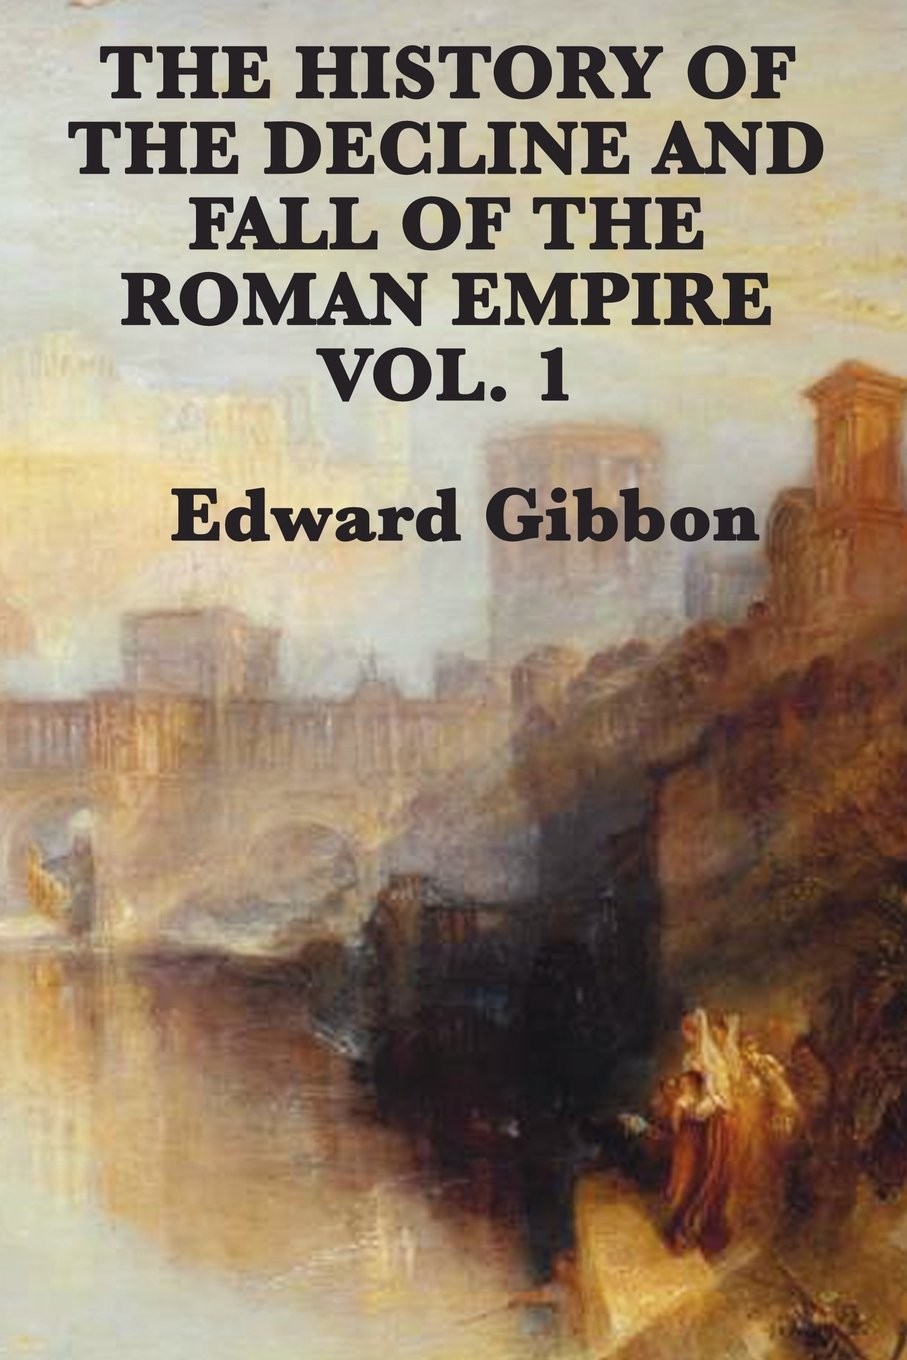 The Decline and Fall of the Roman Empire Volume 1